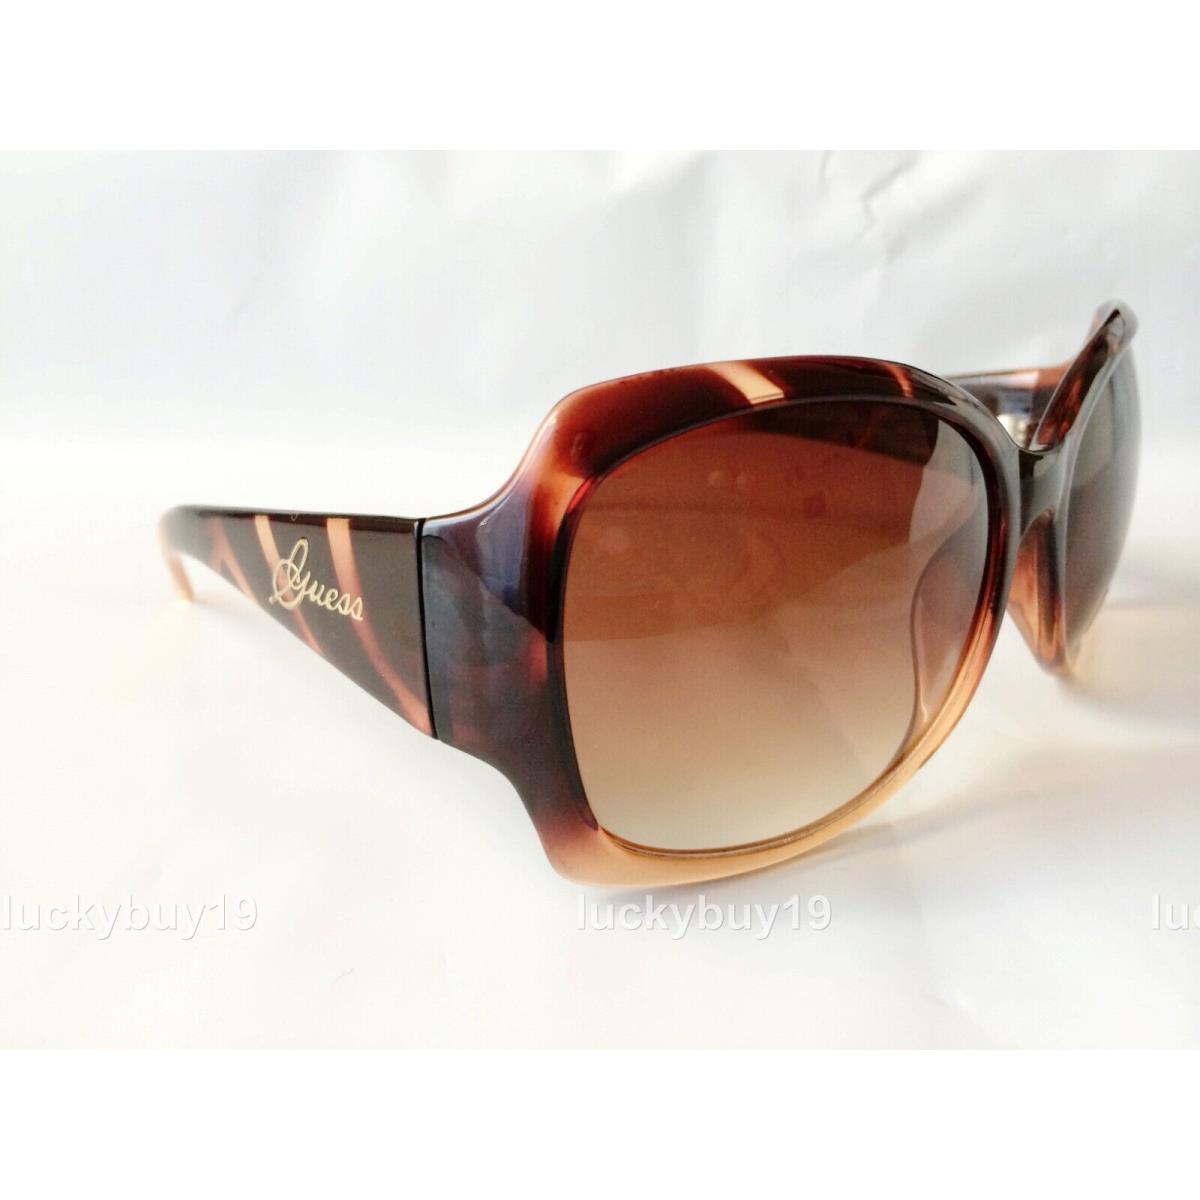 Guess sunglasses  - Brown Frame, Brown Lens 5